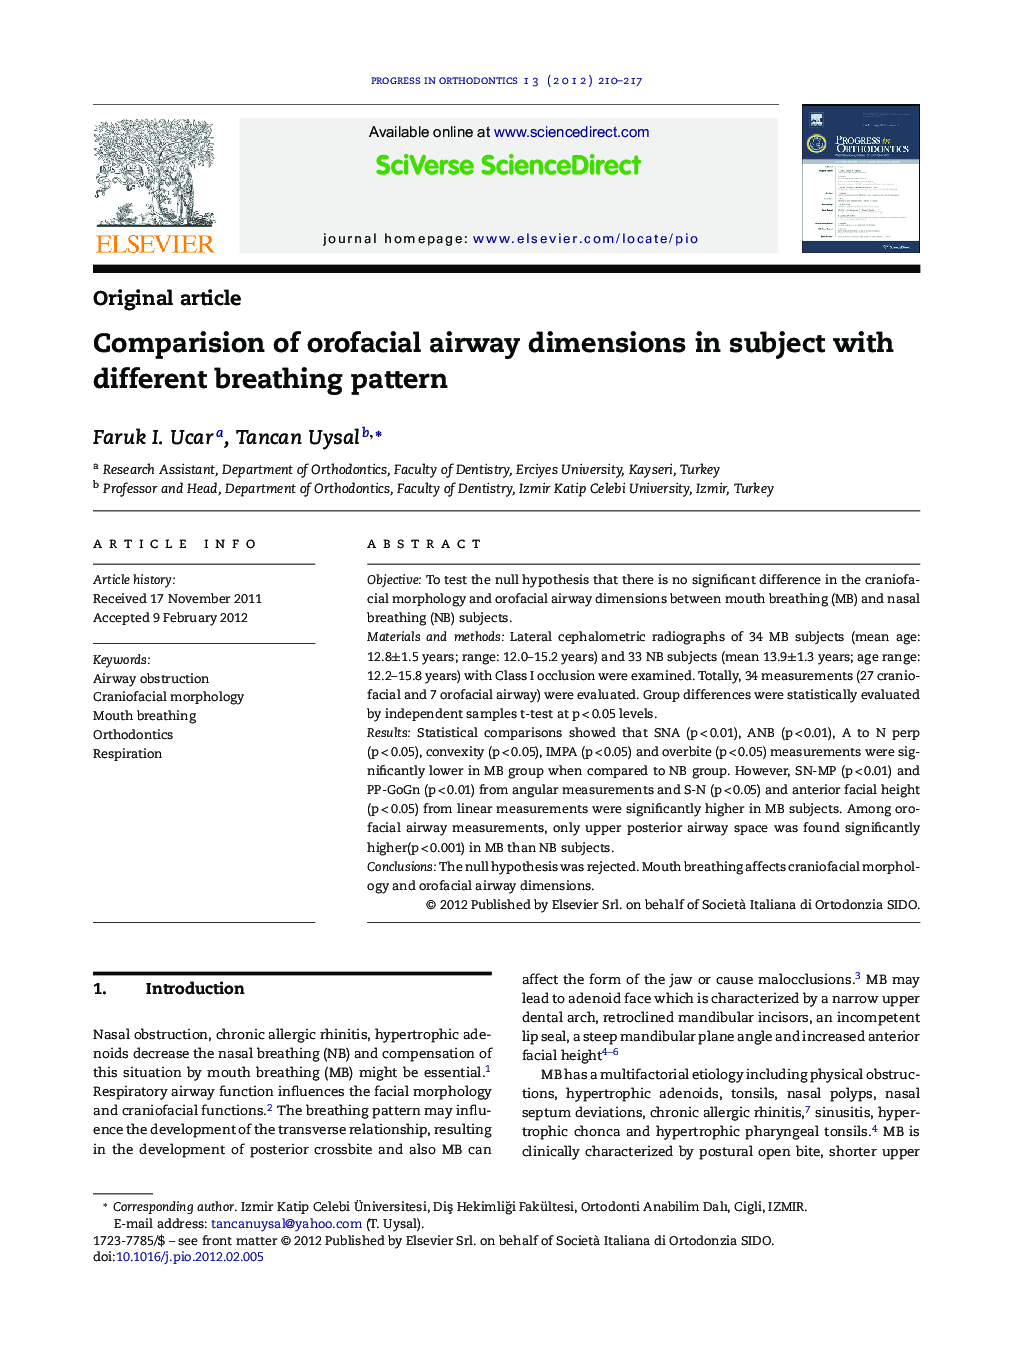 Comparision of orofacial airway dimensions in subject with different breathing pattern